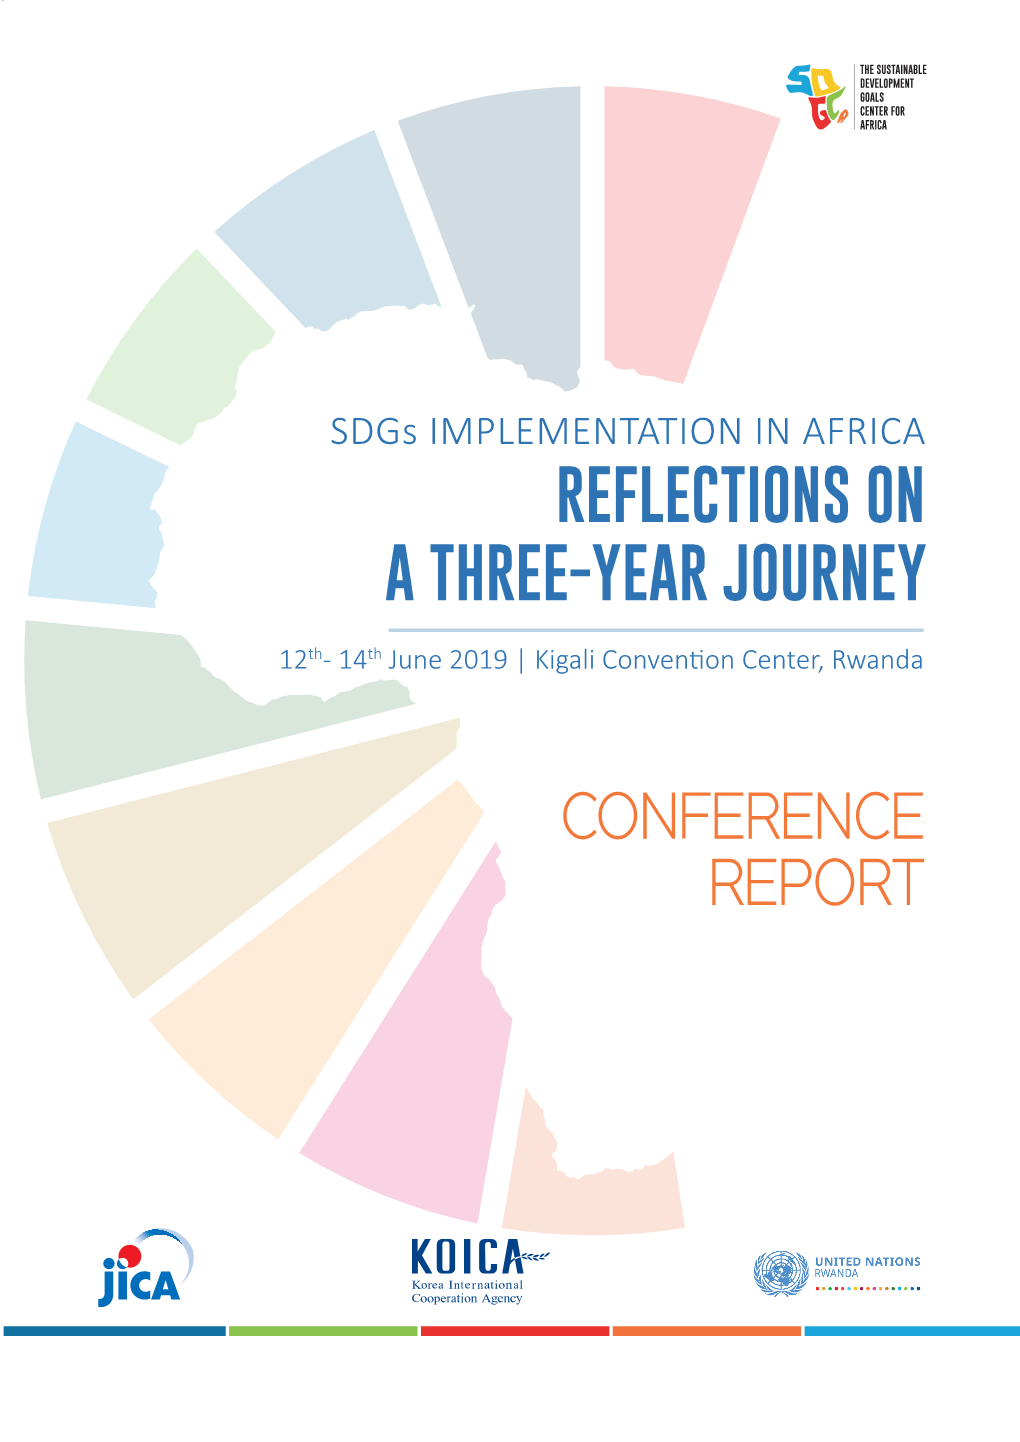 Sdgs Implementation in Africa: Reflections on a Three-Year Journey